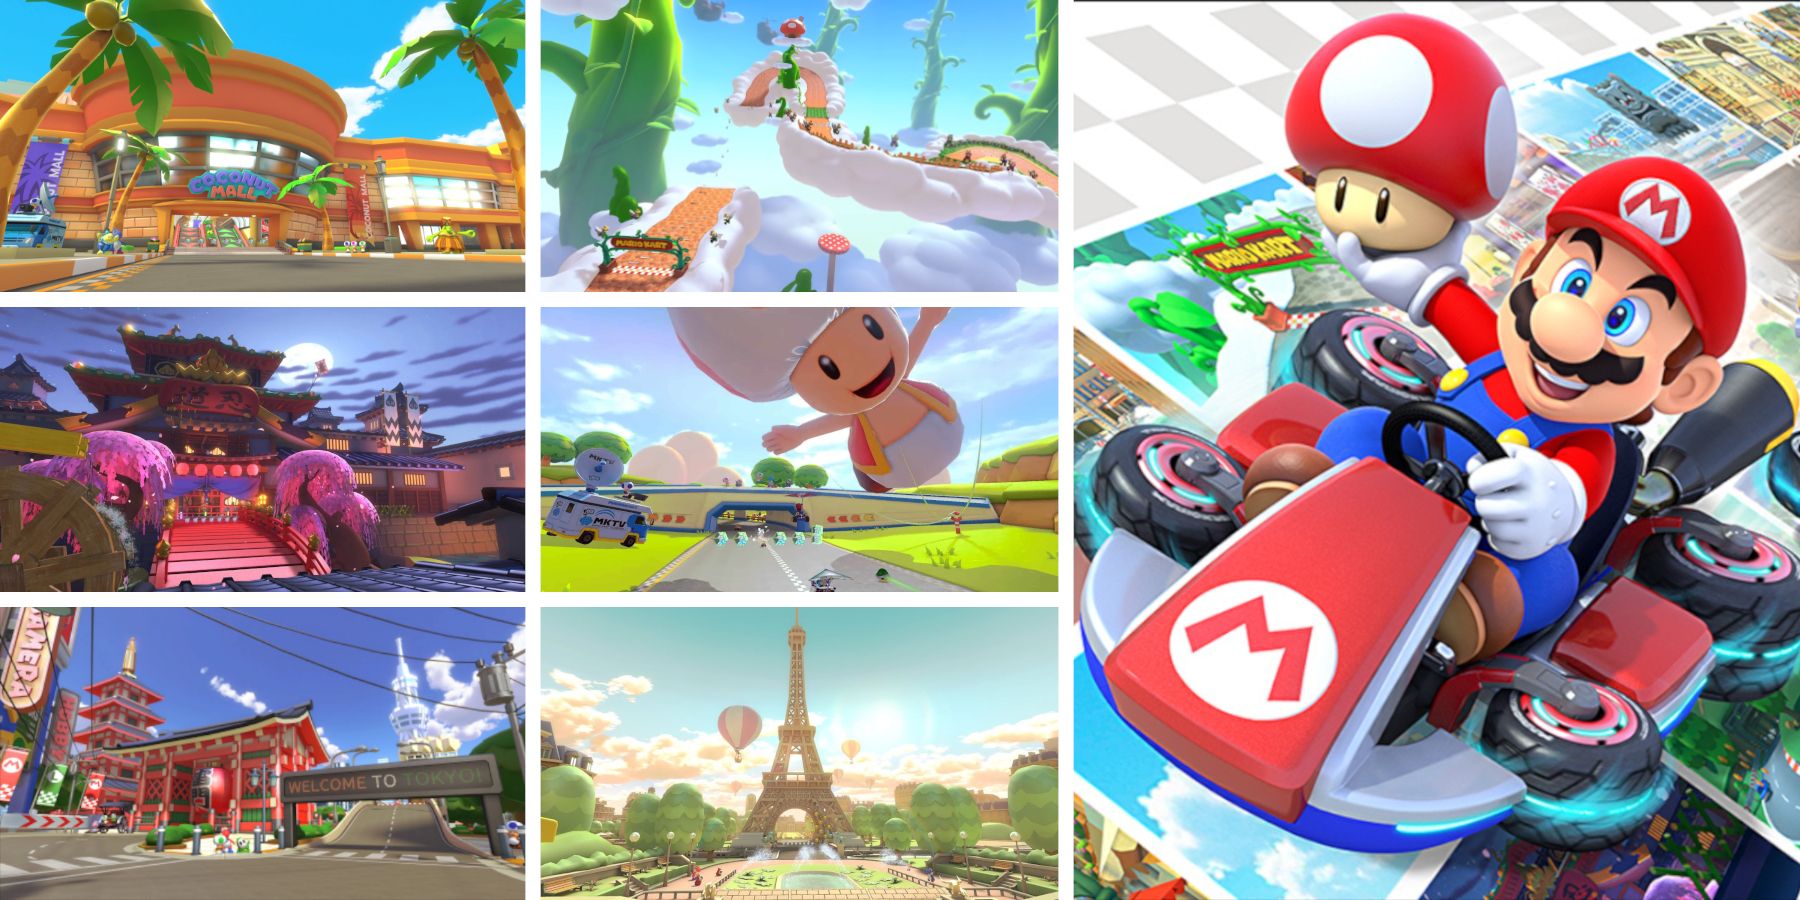 Six of the new Mario Kart 8 Deluxe courses appear in a split screen next to Mario in a go-kart.